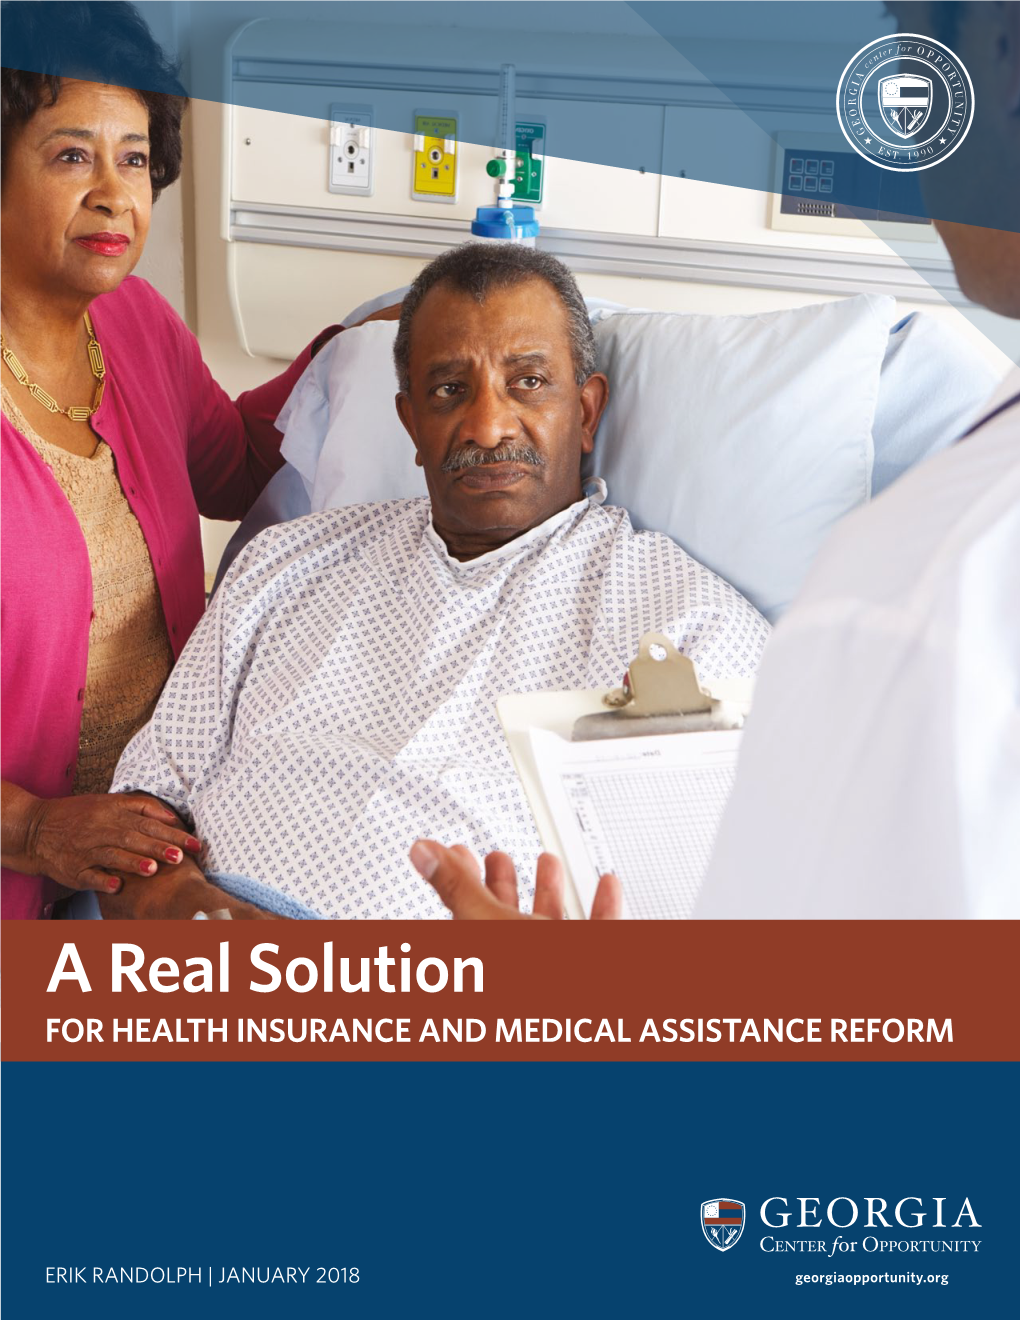 A Real Solution for HEALTH INSURANCE and MEDICAL ASSISTANCE REFORM